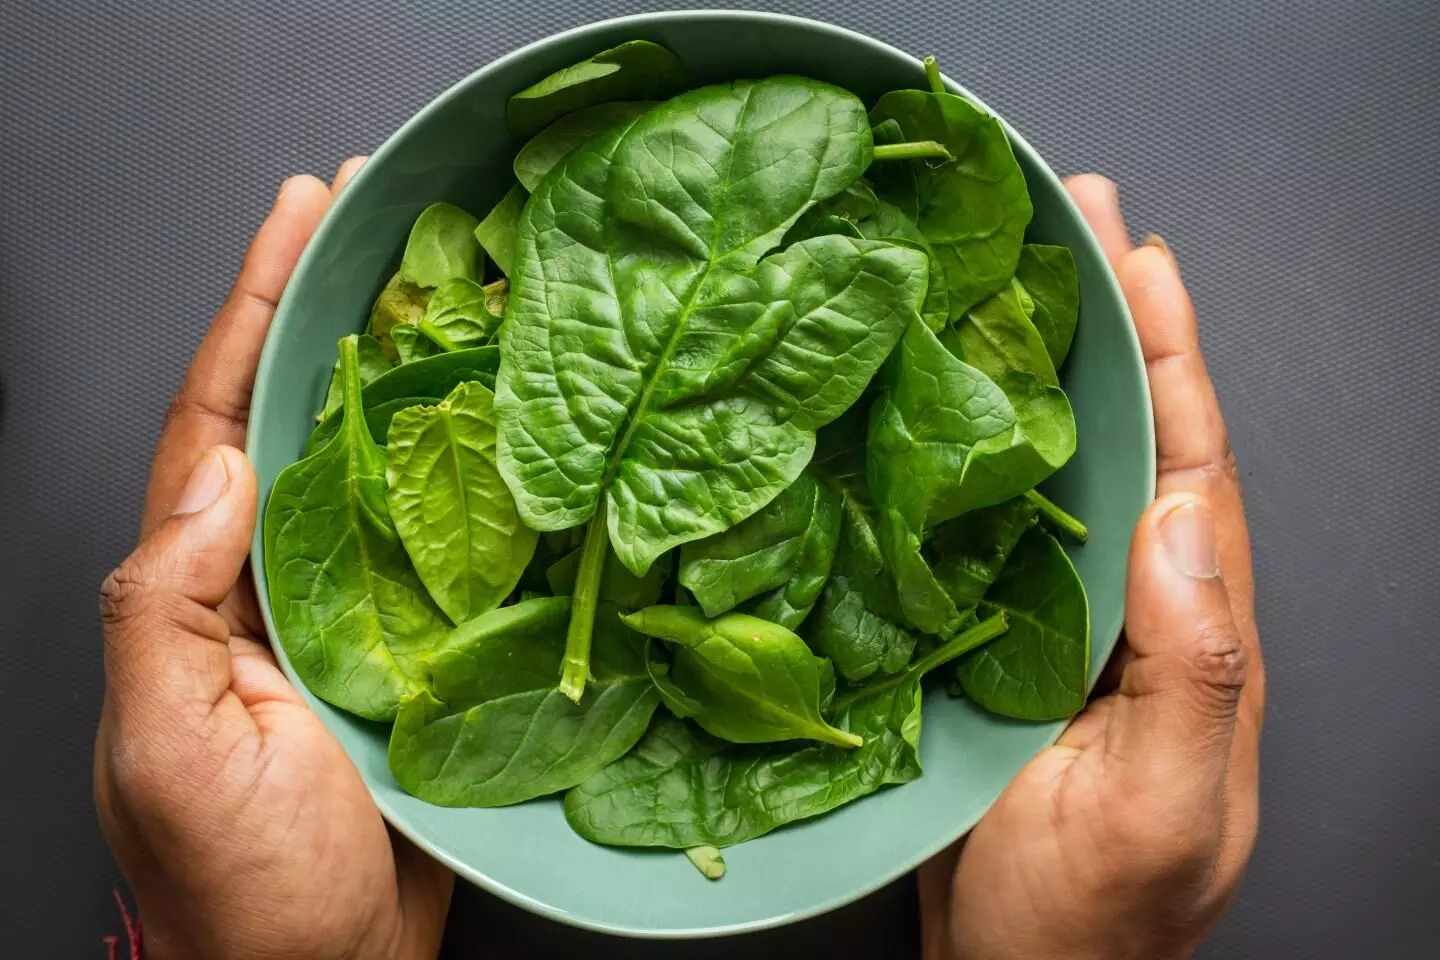 A cupful of leafy green vegetables daily may boost muscle function